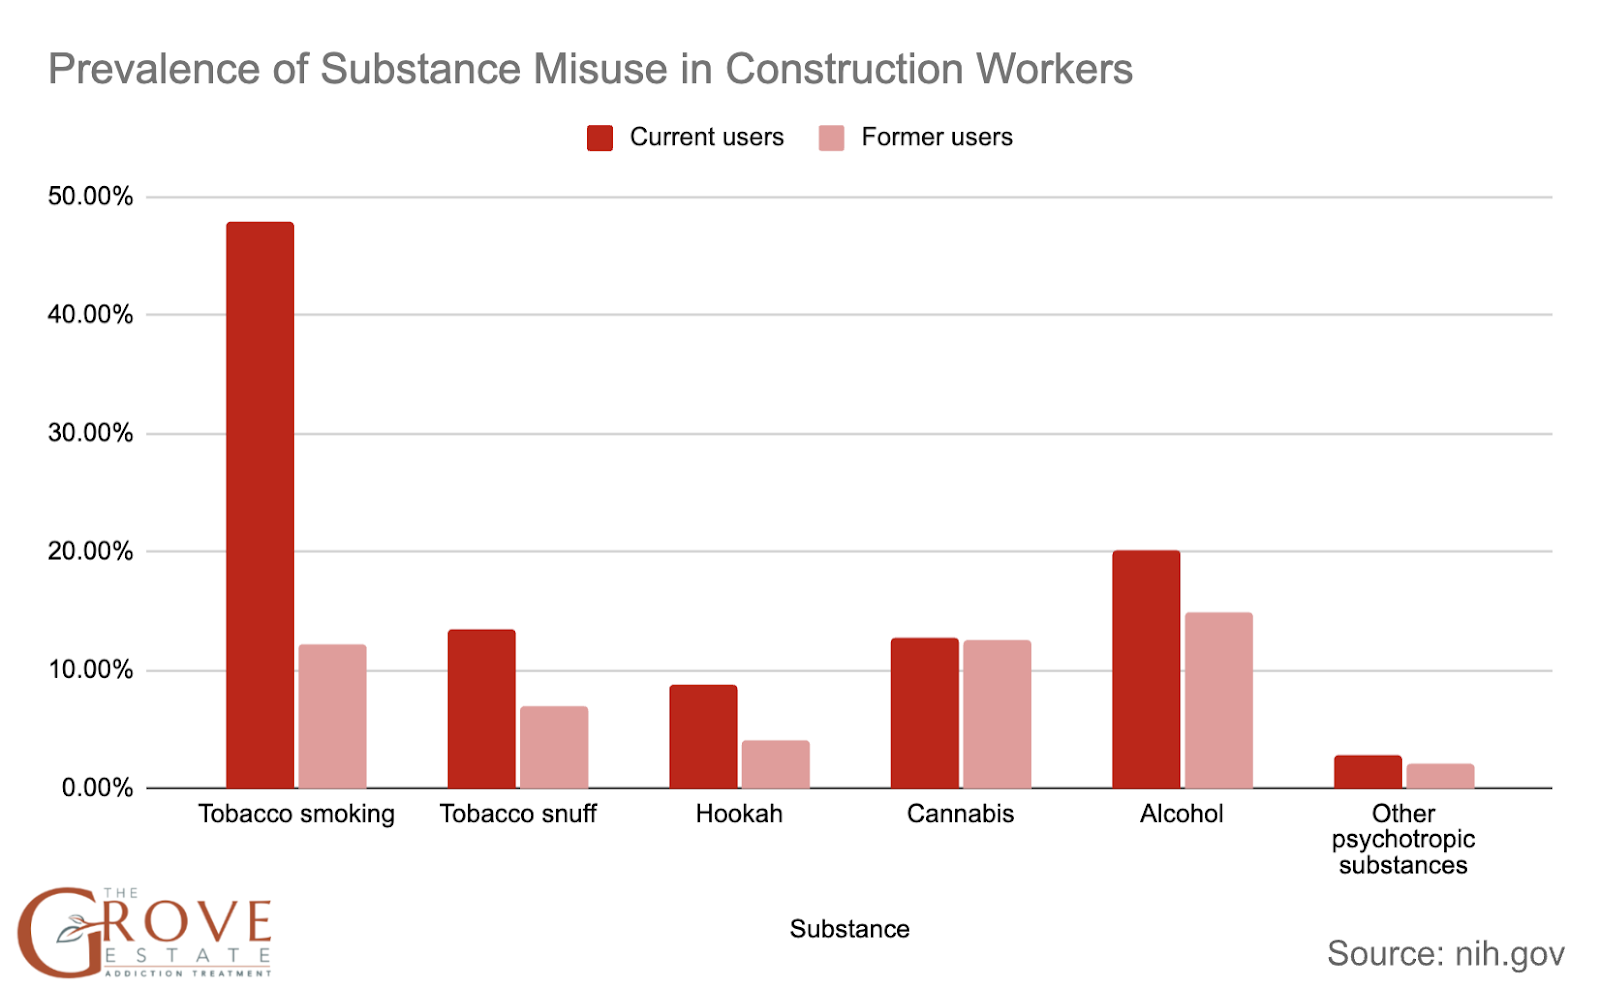 Prevalence of Substance Misuse in Construction Workers